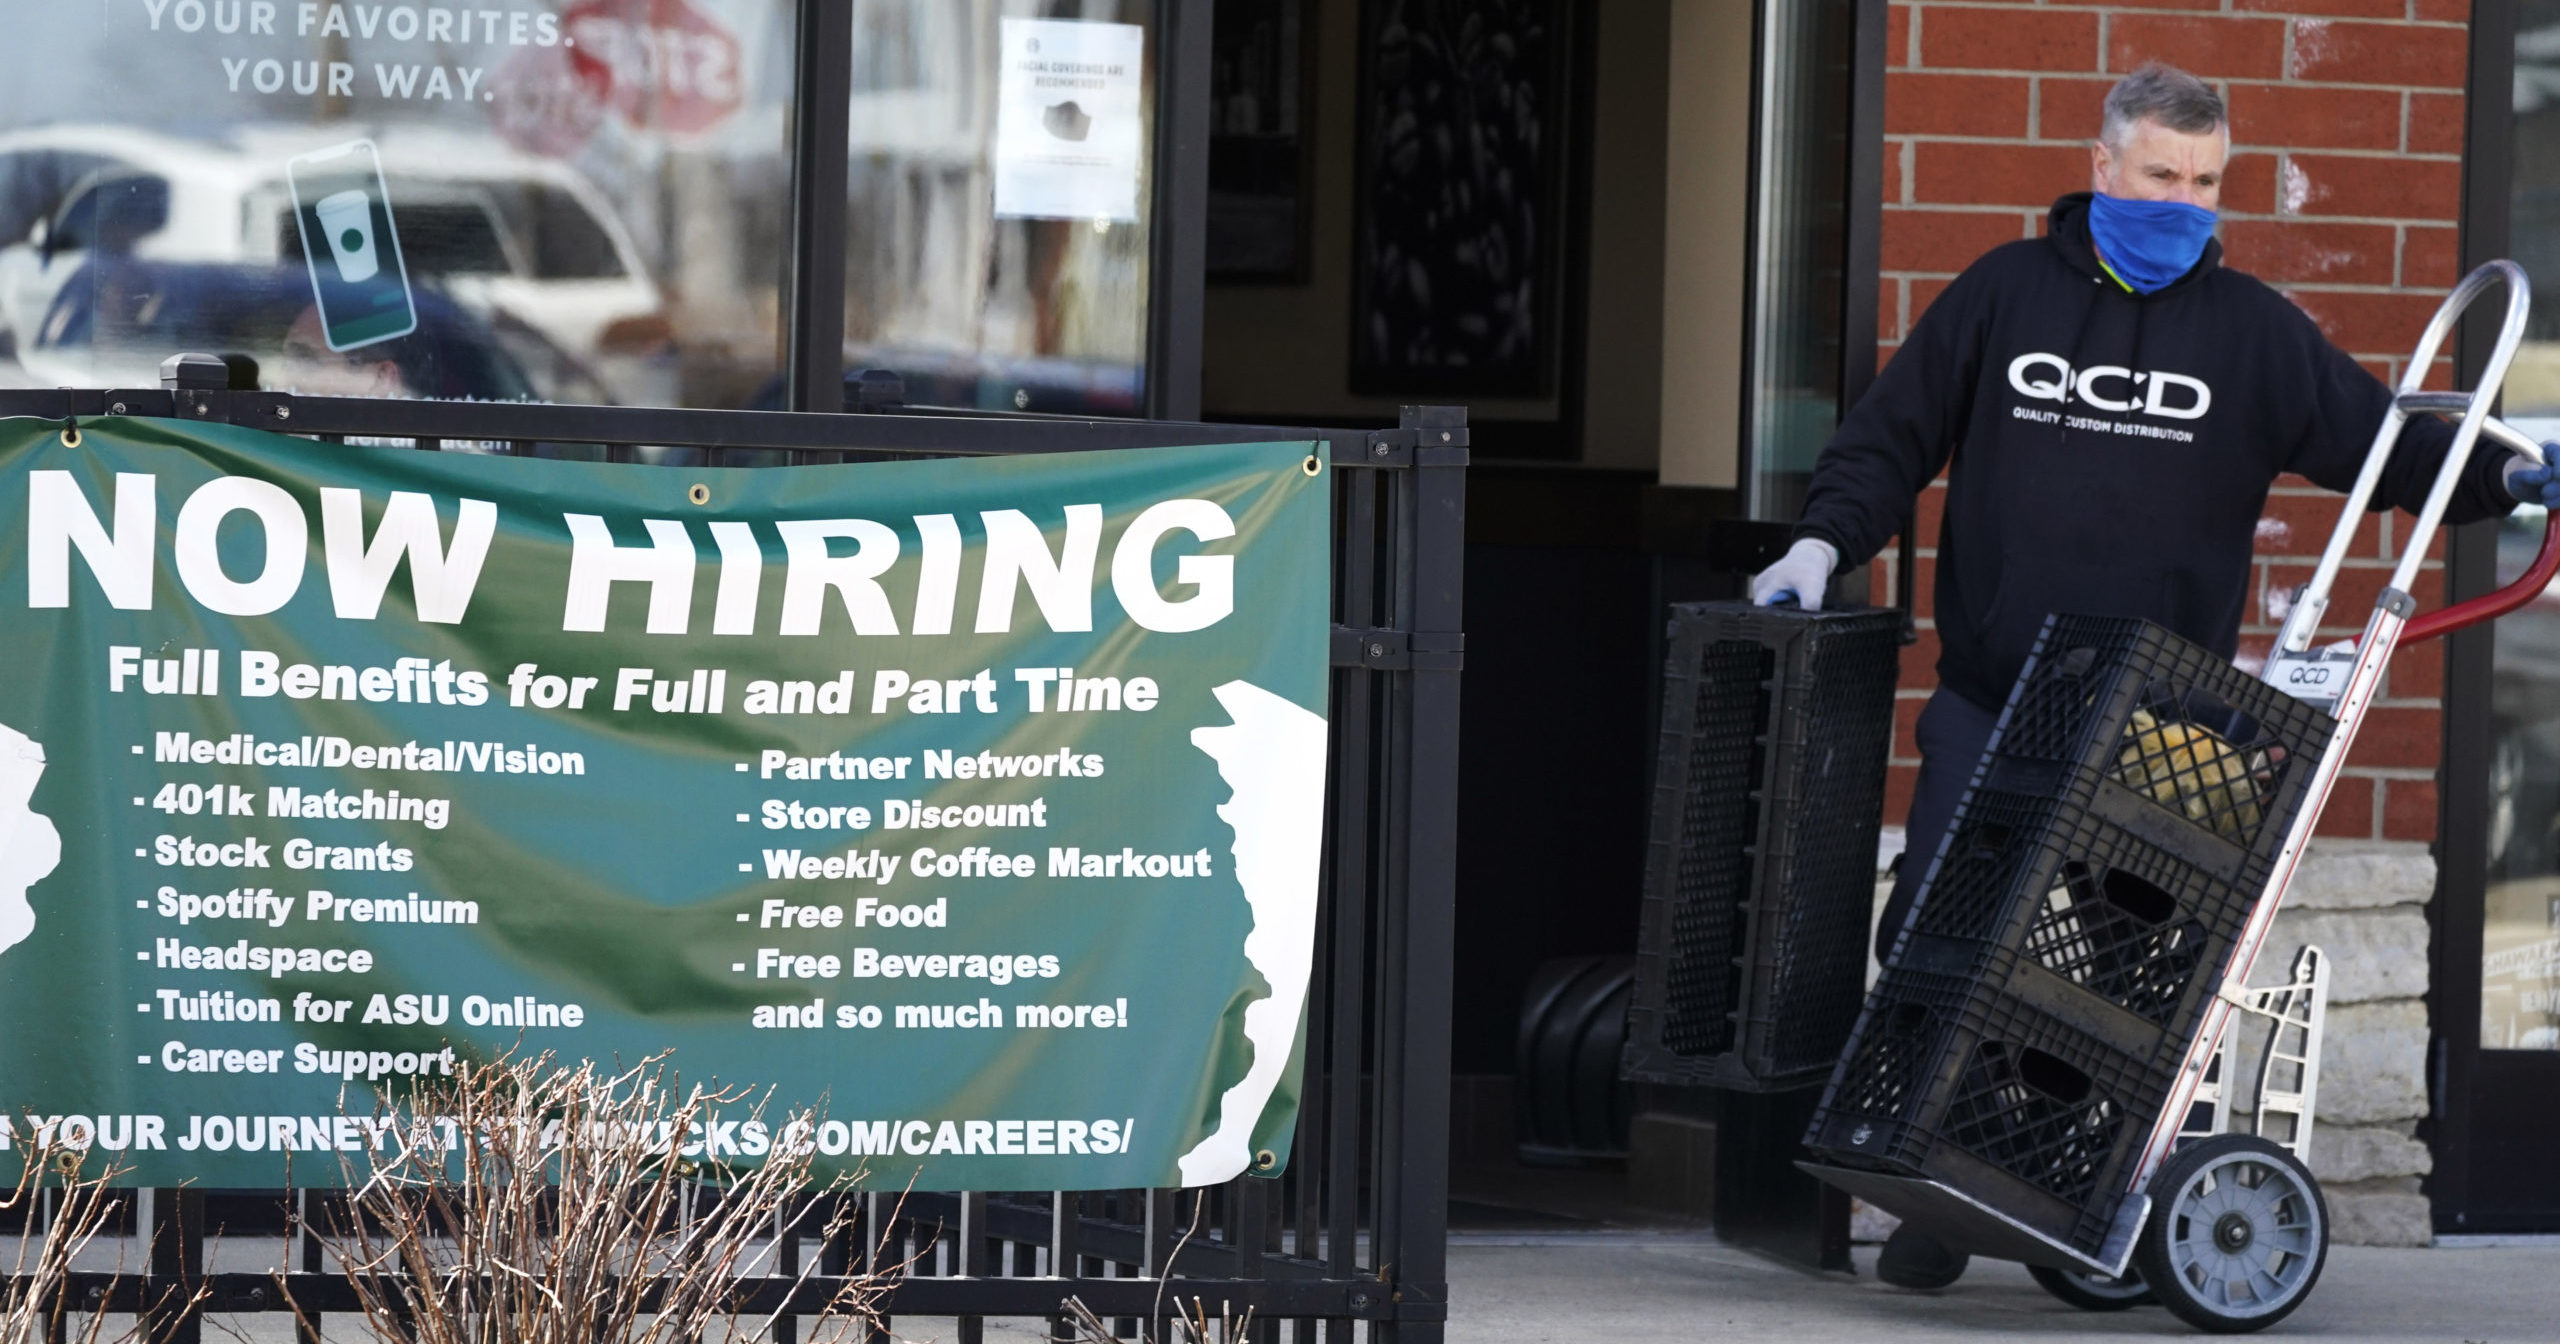 A hiring sign is displayed outside of a Starbucks in Schaumburg, Illinois, on April 1.